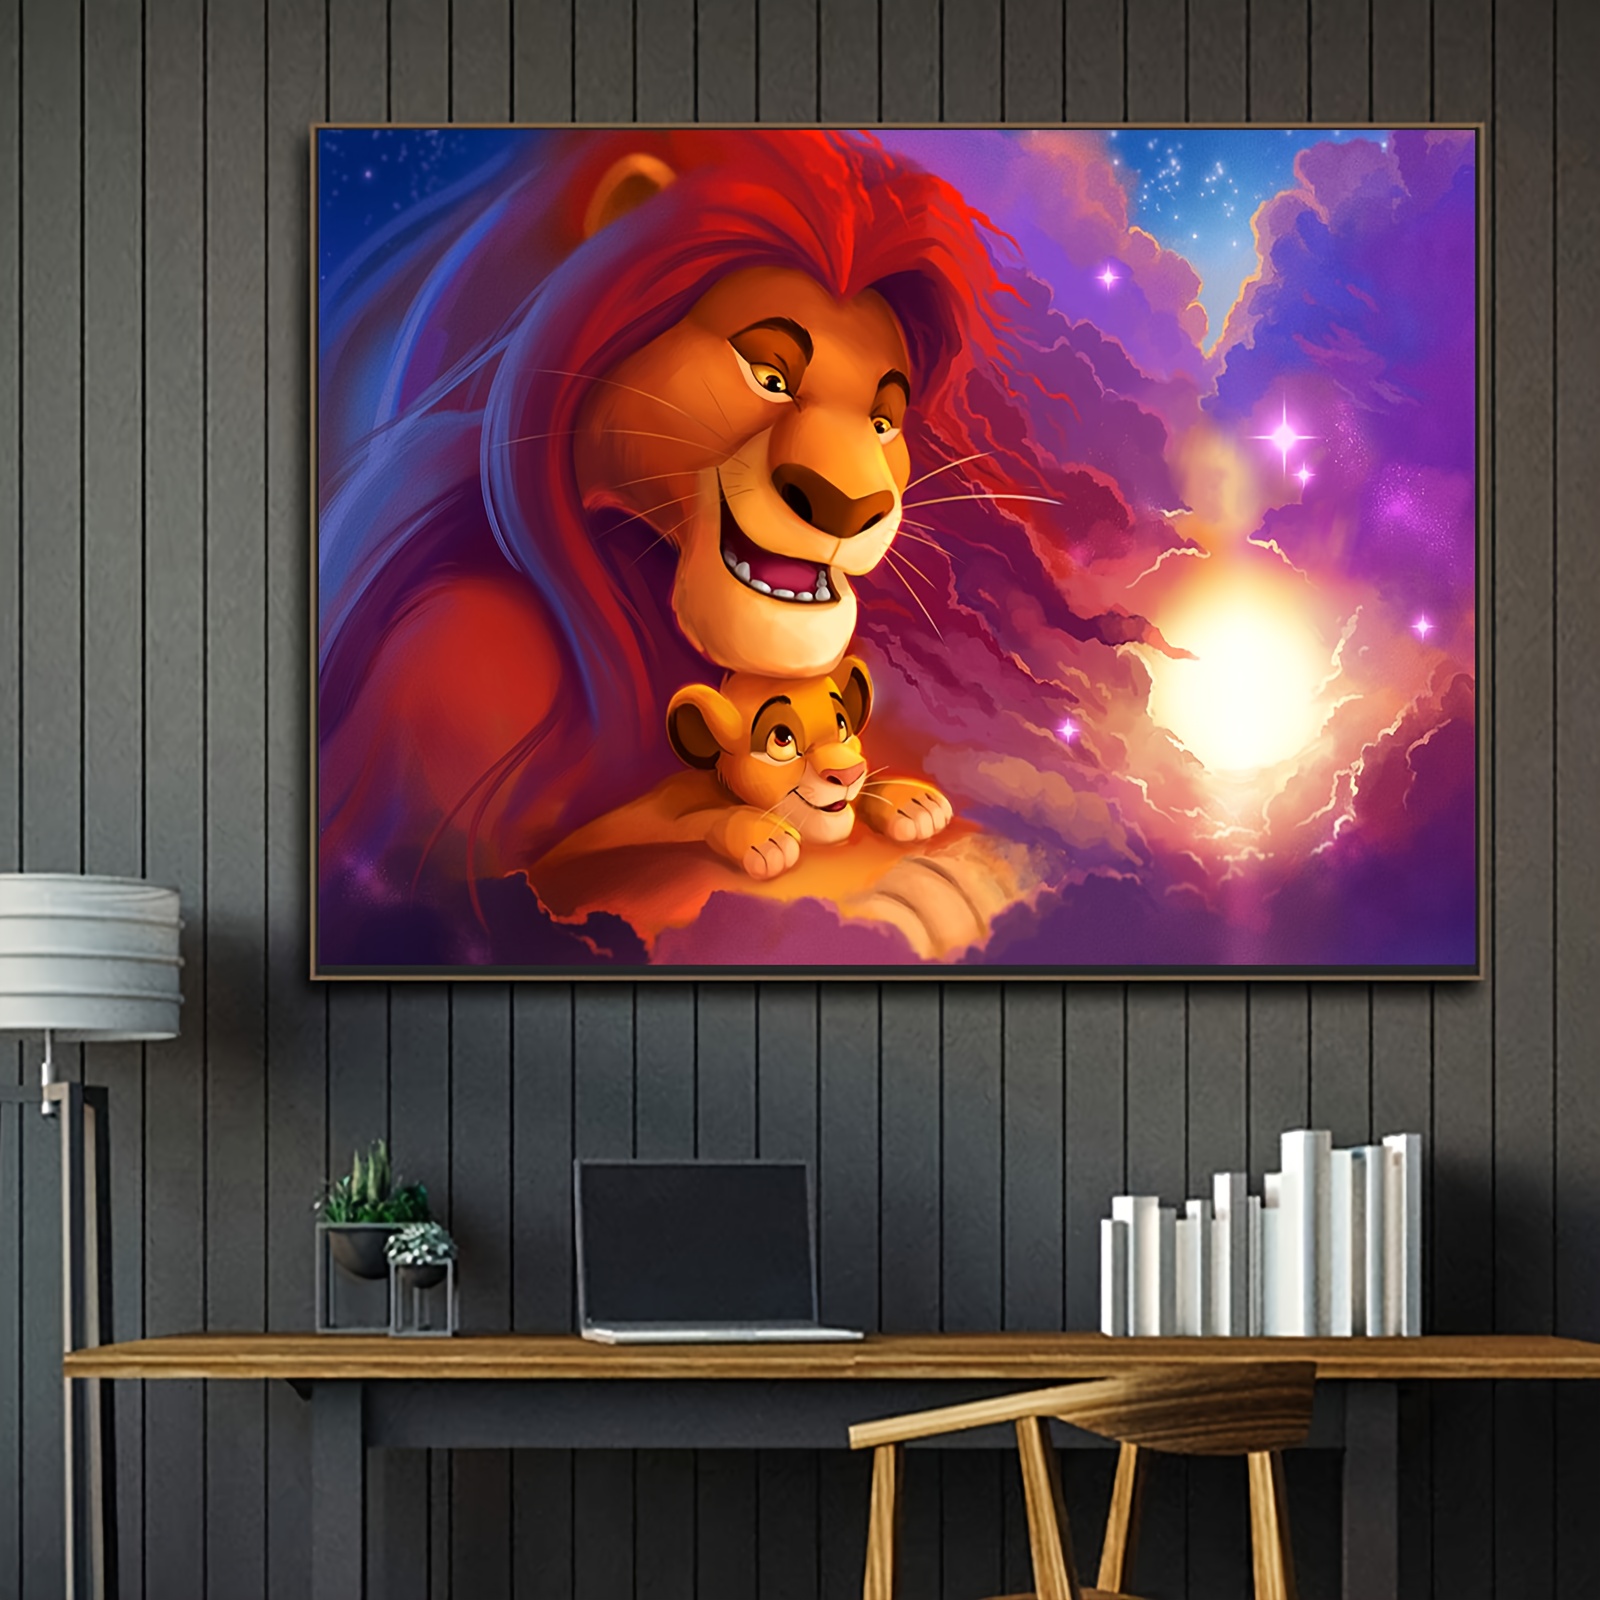 

Lion King 5d Diamond Art Painting Kits Diamond Embroidery Mosaic Rhinestone Picture Art Crafts Home Bedroom Living Room Wall Decor Gift